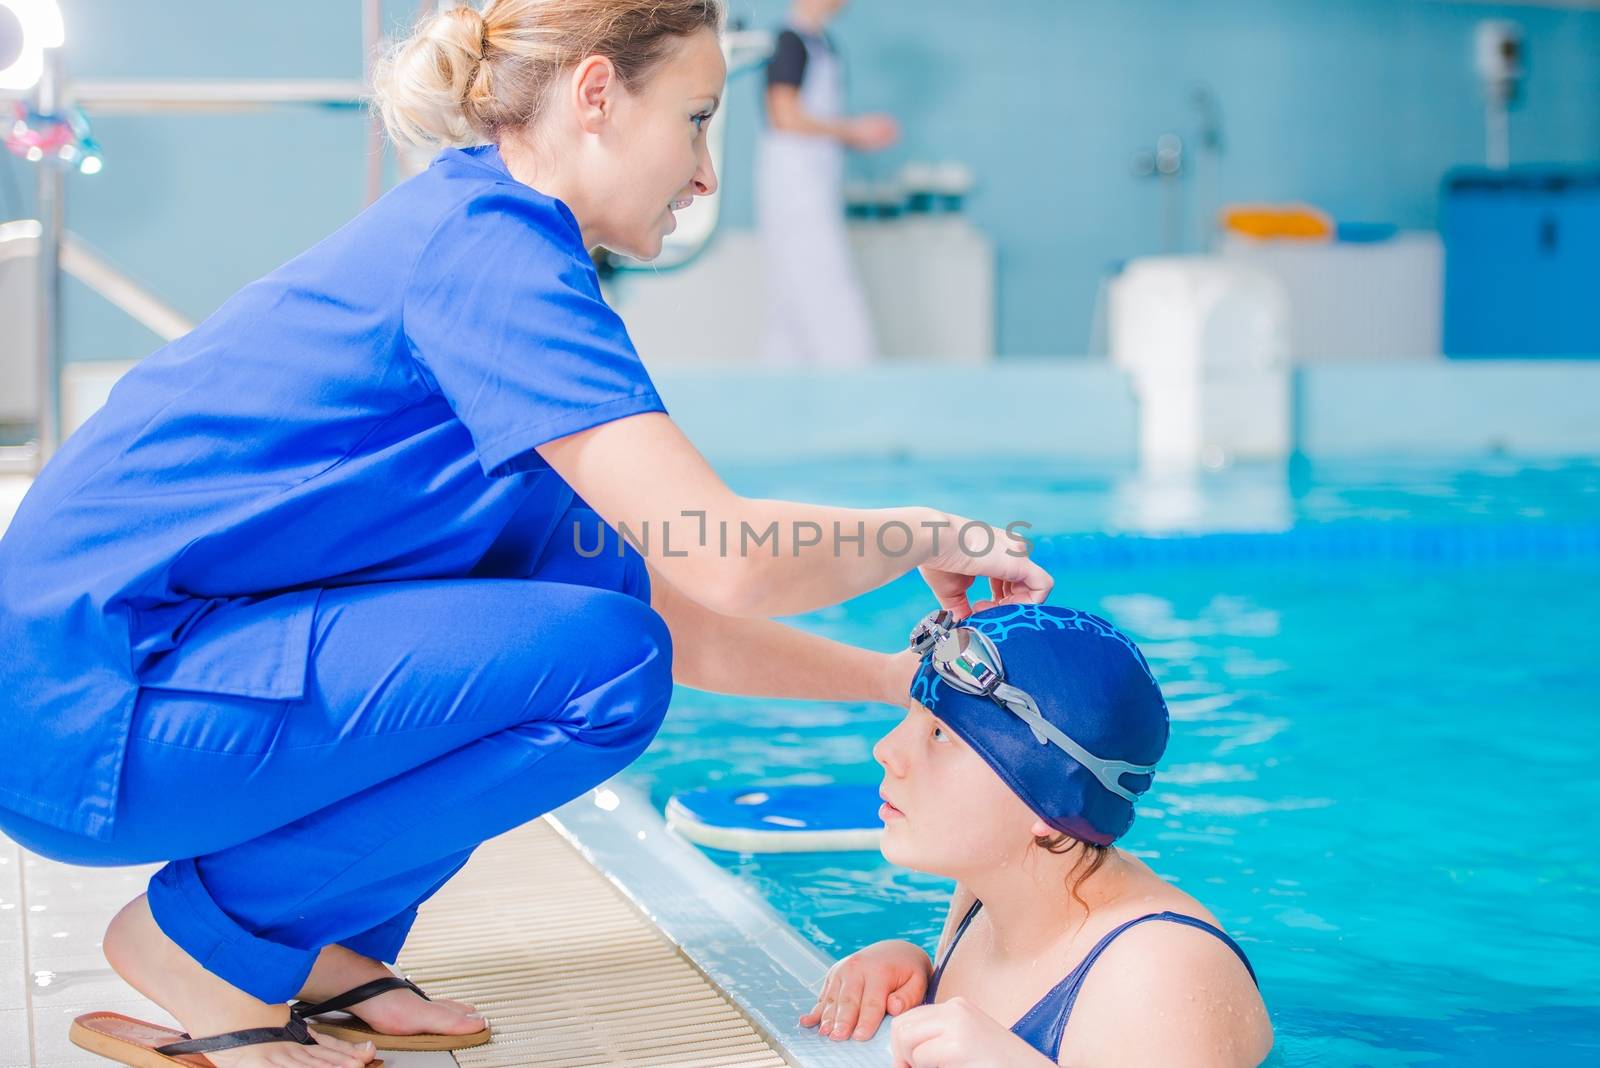 Rehabilitation in Swimming Pool. Medical Staff Supervising Children Rehabilitation in the Rehabilitation Center Pool.